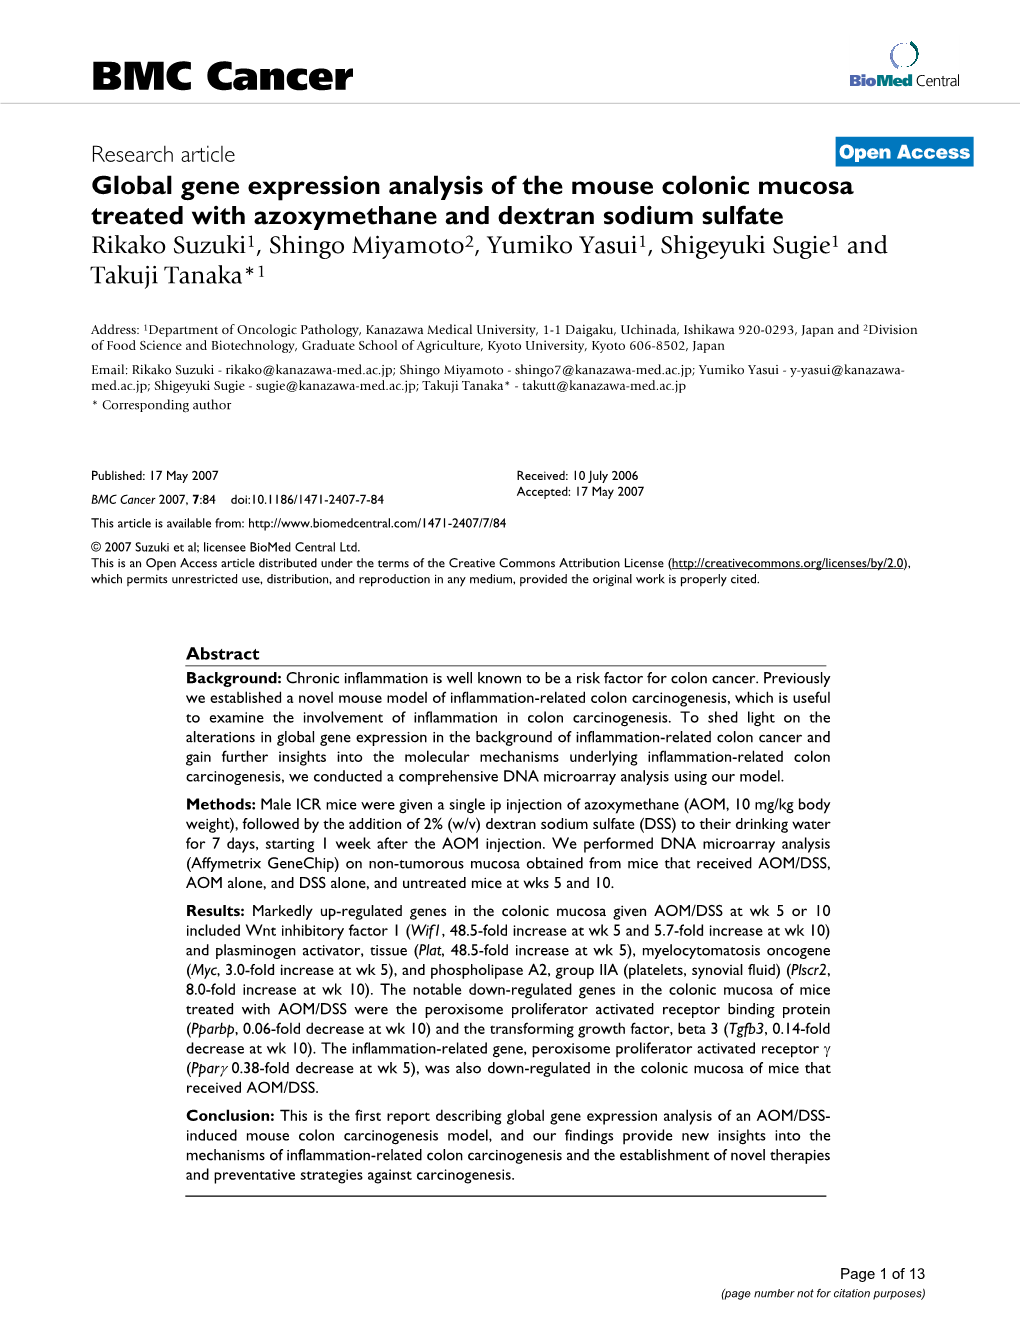 Global Gene Expression Analysis of the Mouse Colonic Mucosa Treated